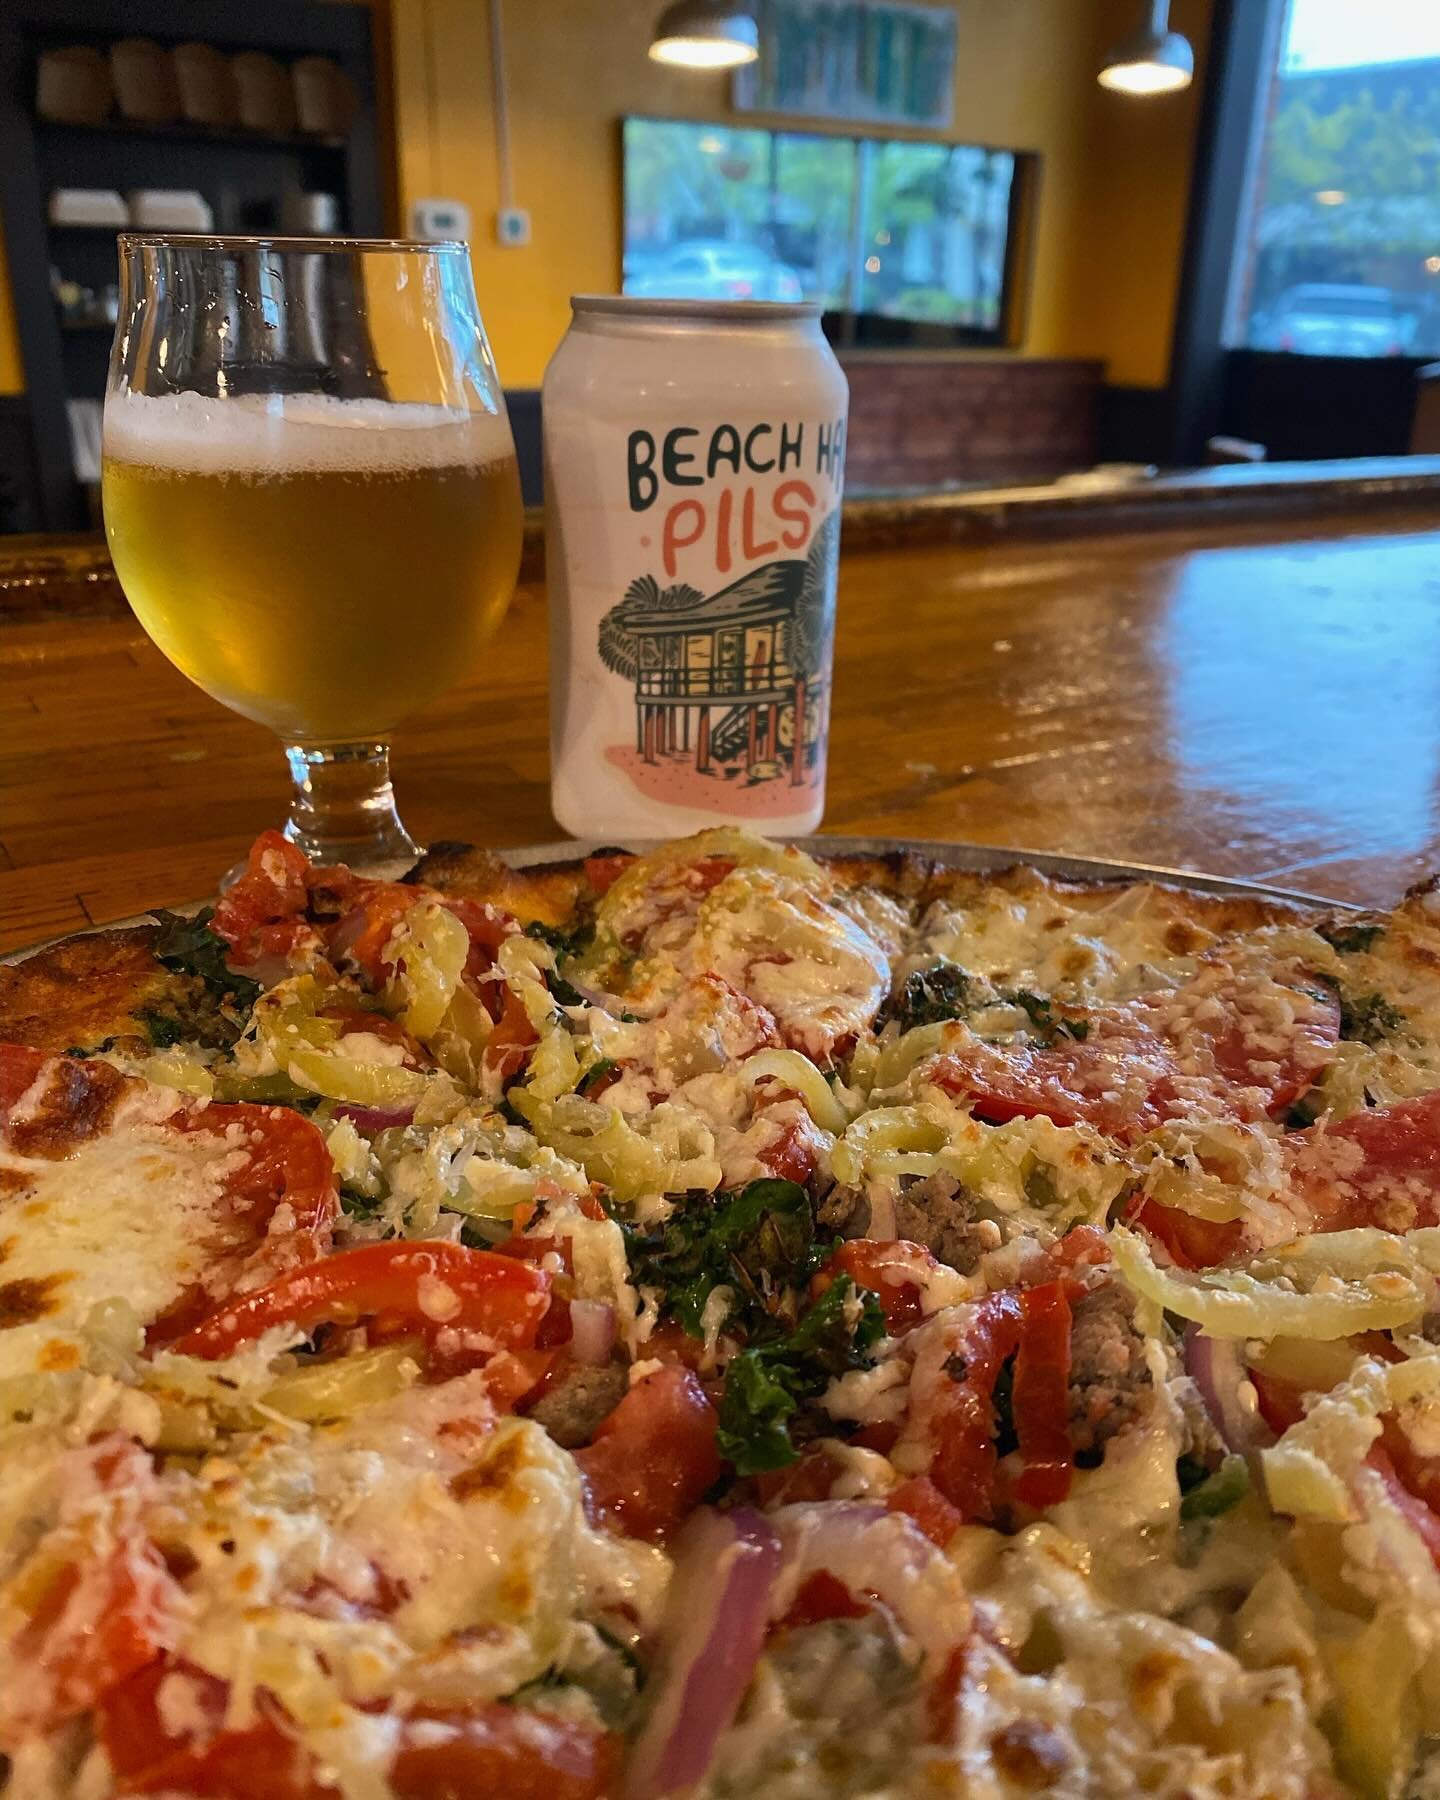 Thursday&rsquo;s specials!

🥗: artisan lettuce, pickled red onion, rainbow carrots, roasted kale, white cheddar, toasted almonds, tomato vinaigrette
🍕: basil pesto, house sausage, wilted kale, pickled banana peppers, red onion, vine ripe tomatoes, 